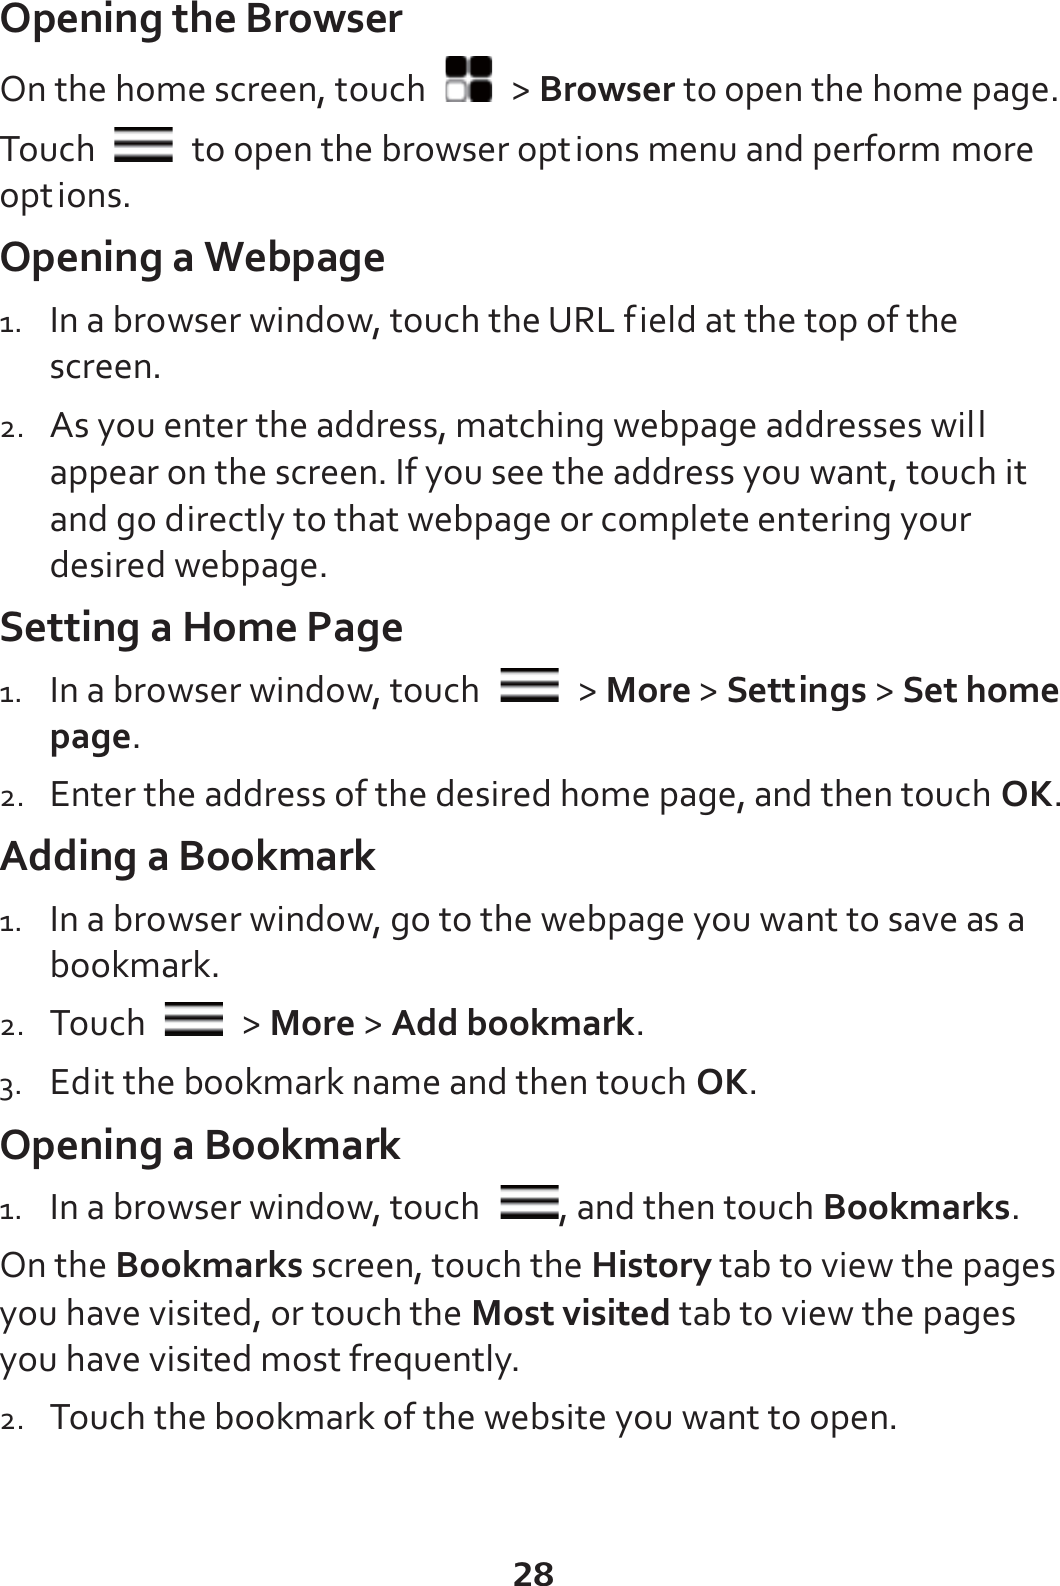 28 Opening the Browser On the home screen, touch   &gt; Browser to open the home page. Touch    to open the browser options menu and perform more options. Opening a Webpage 1. In a browser window, touch the URL field at the top of the screen. 2. As you enter the address, matching webpage addresses will appear on the screen. If you see the address you want, touch it and go directly to that webpage or complete entering your desired webpage. Setting a Home Page 1. In a browser window, touch   &gt; More &gt; Settings &gt; Set home page. 2. Enter the address of the desired home page, and then touch OK. Adding a Bookmark 1. In a browser window, go to the webpage you want to save as a bookmark. 2. Touch   &gt; More &gt; Add bookmark. 3. Edit the bookmark name and then touch OK. Opening a Bookmark 1. In a browser window, touch  , and then touch Bookmarks. On the Bookmarks screen, touch the History tab to view the pages you have visited, or touch the Most visited tab to view the pages you have visited most frequently. 2. Touch the bookmark of the website you want to open. 